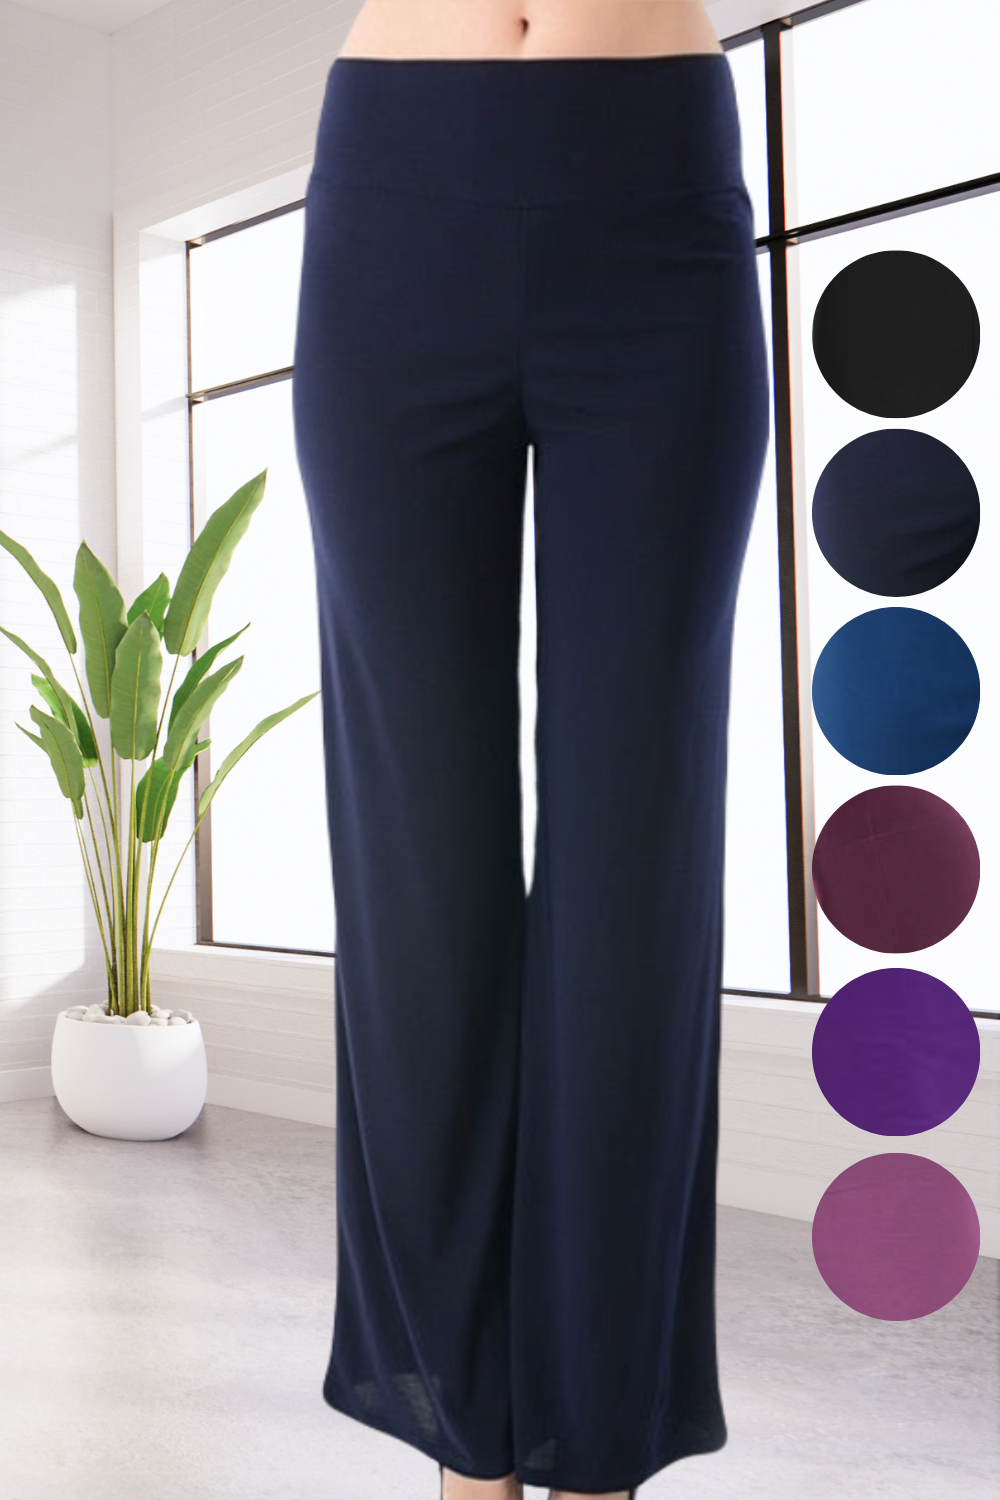 womens misses priscilla palazzo pant foldover yoga waistband slinky ITY material fabric 95/5 poly/spandex stretchy loungewear to evening wear casual to dressy comfort stretch waistband true to size 6 colors: Black, Navy Blue, Teal Blue, Purple, Eggplant, Violet